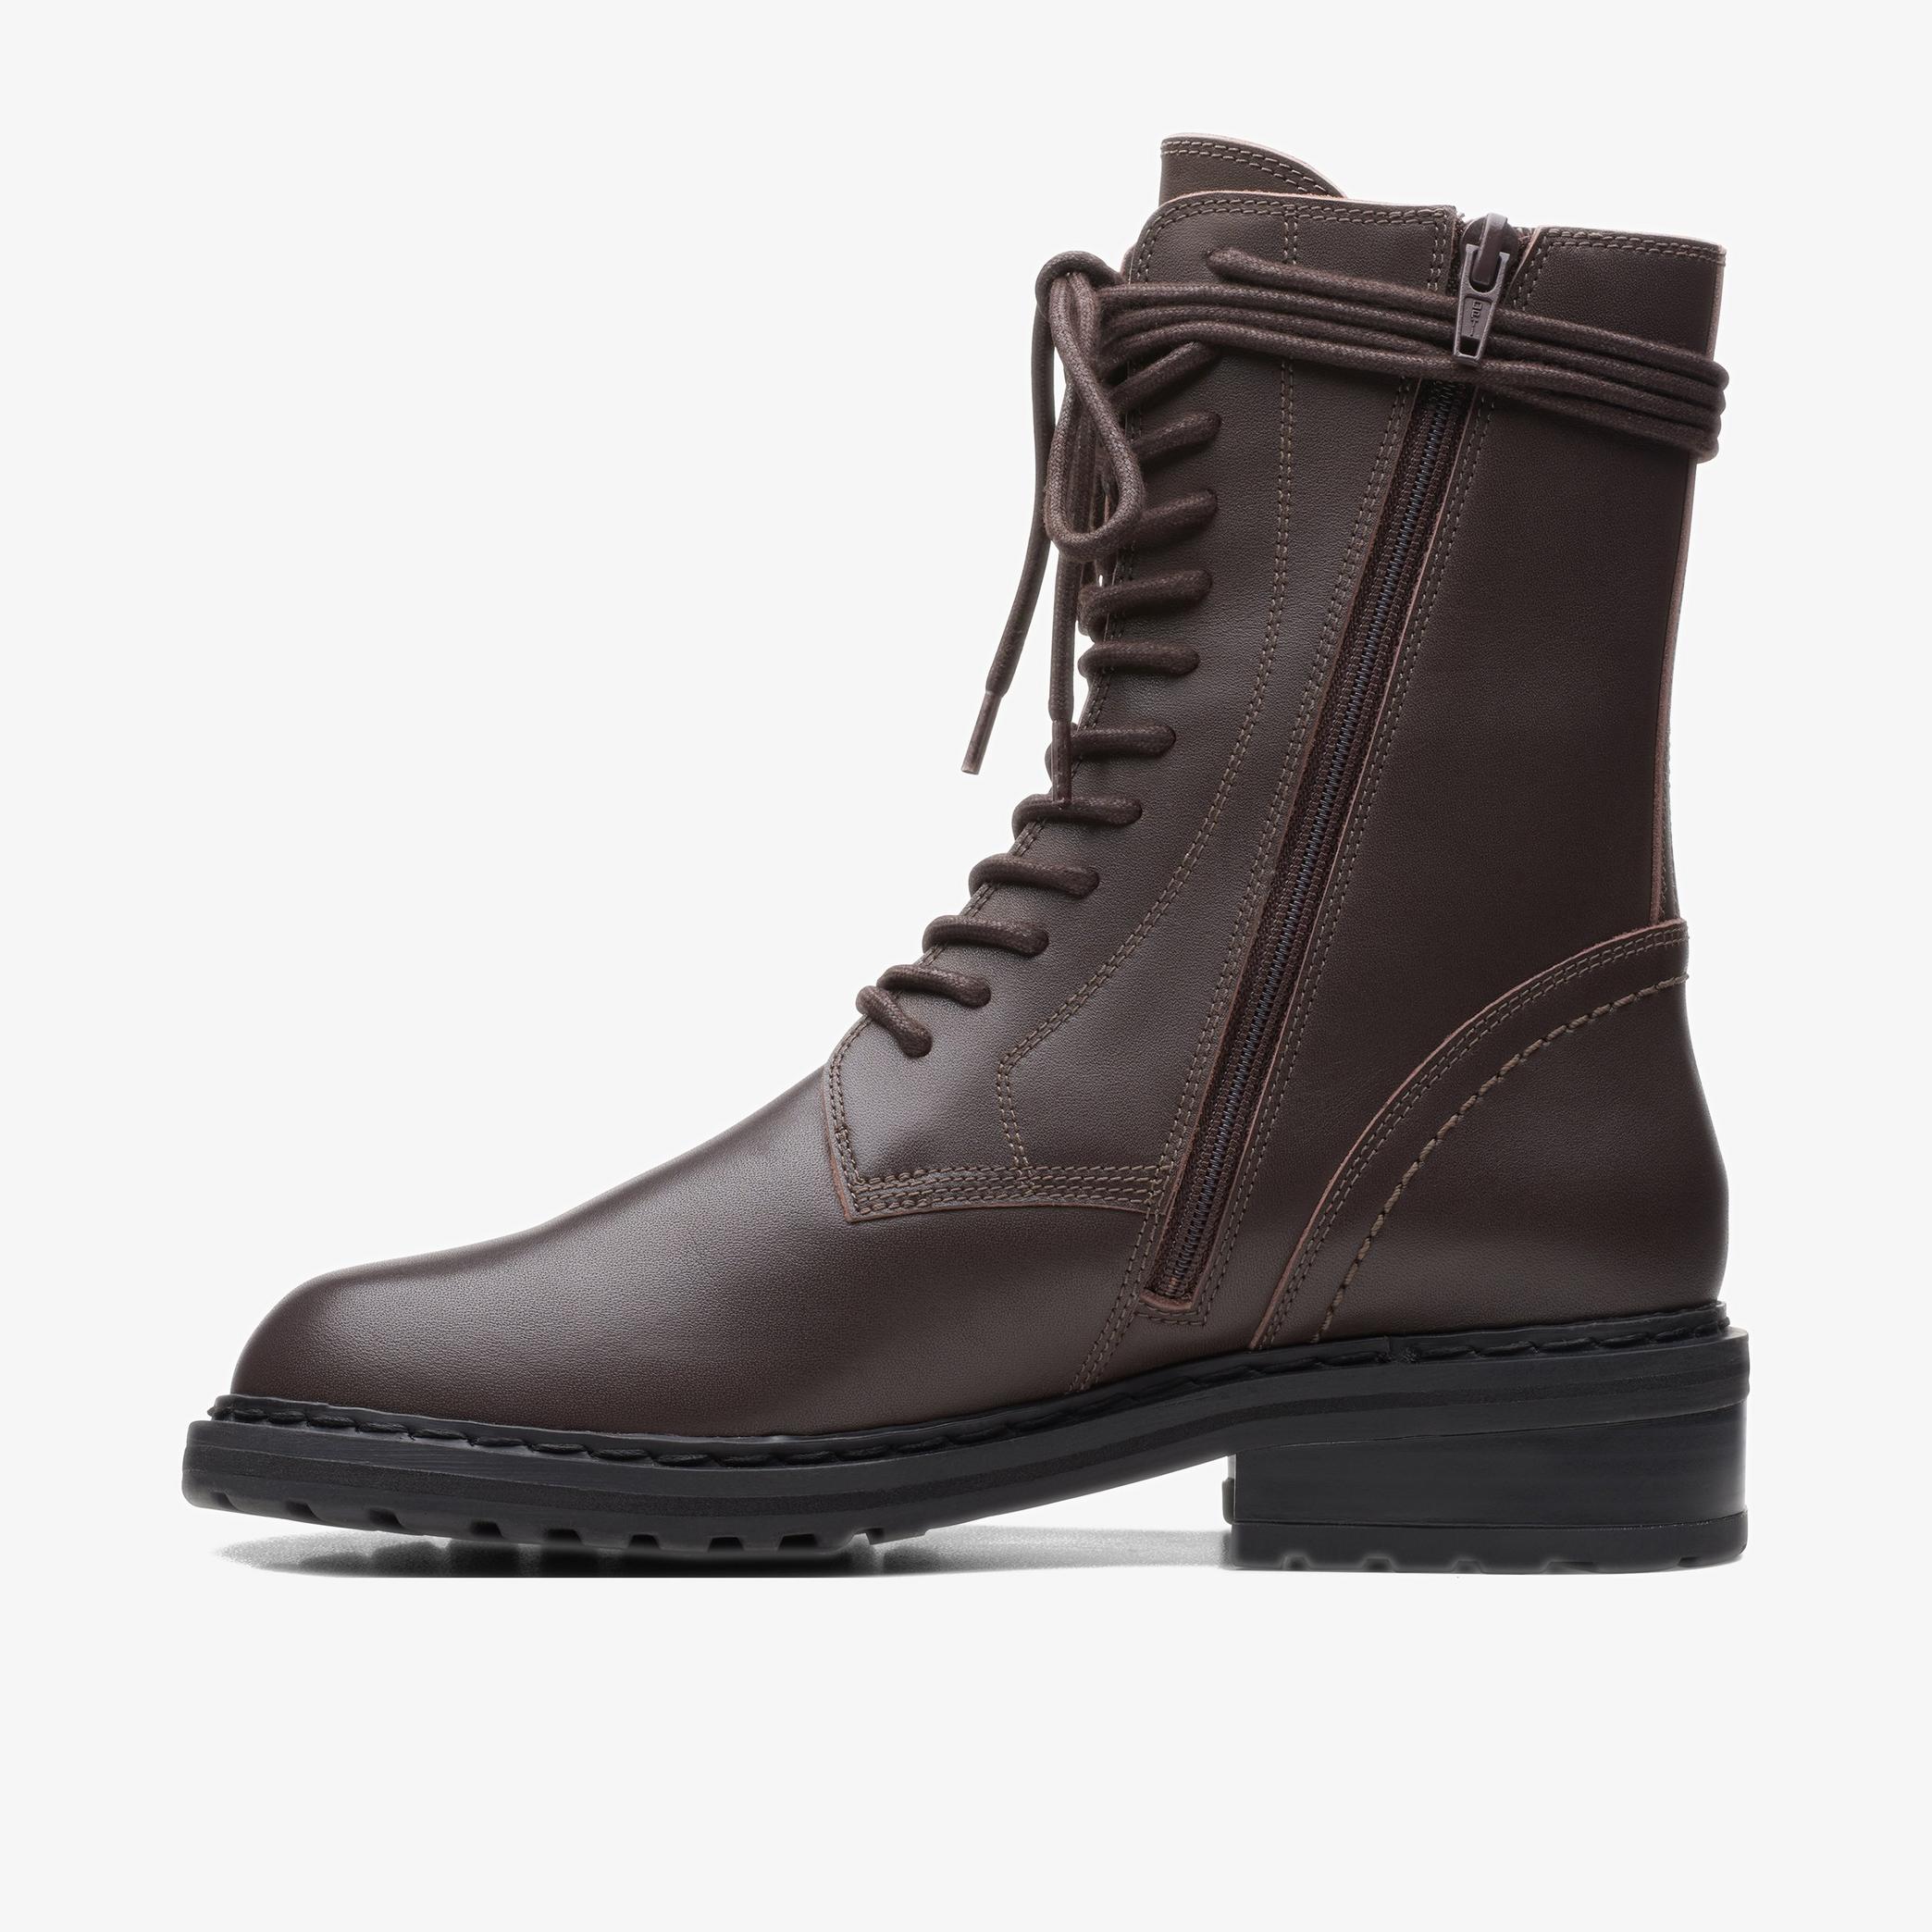 Tilham Lace Dark Brown Leather Ankle Boots, view 2 of 6